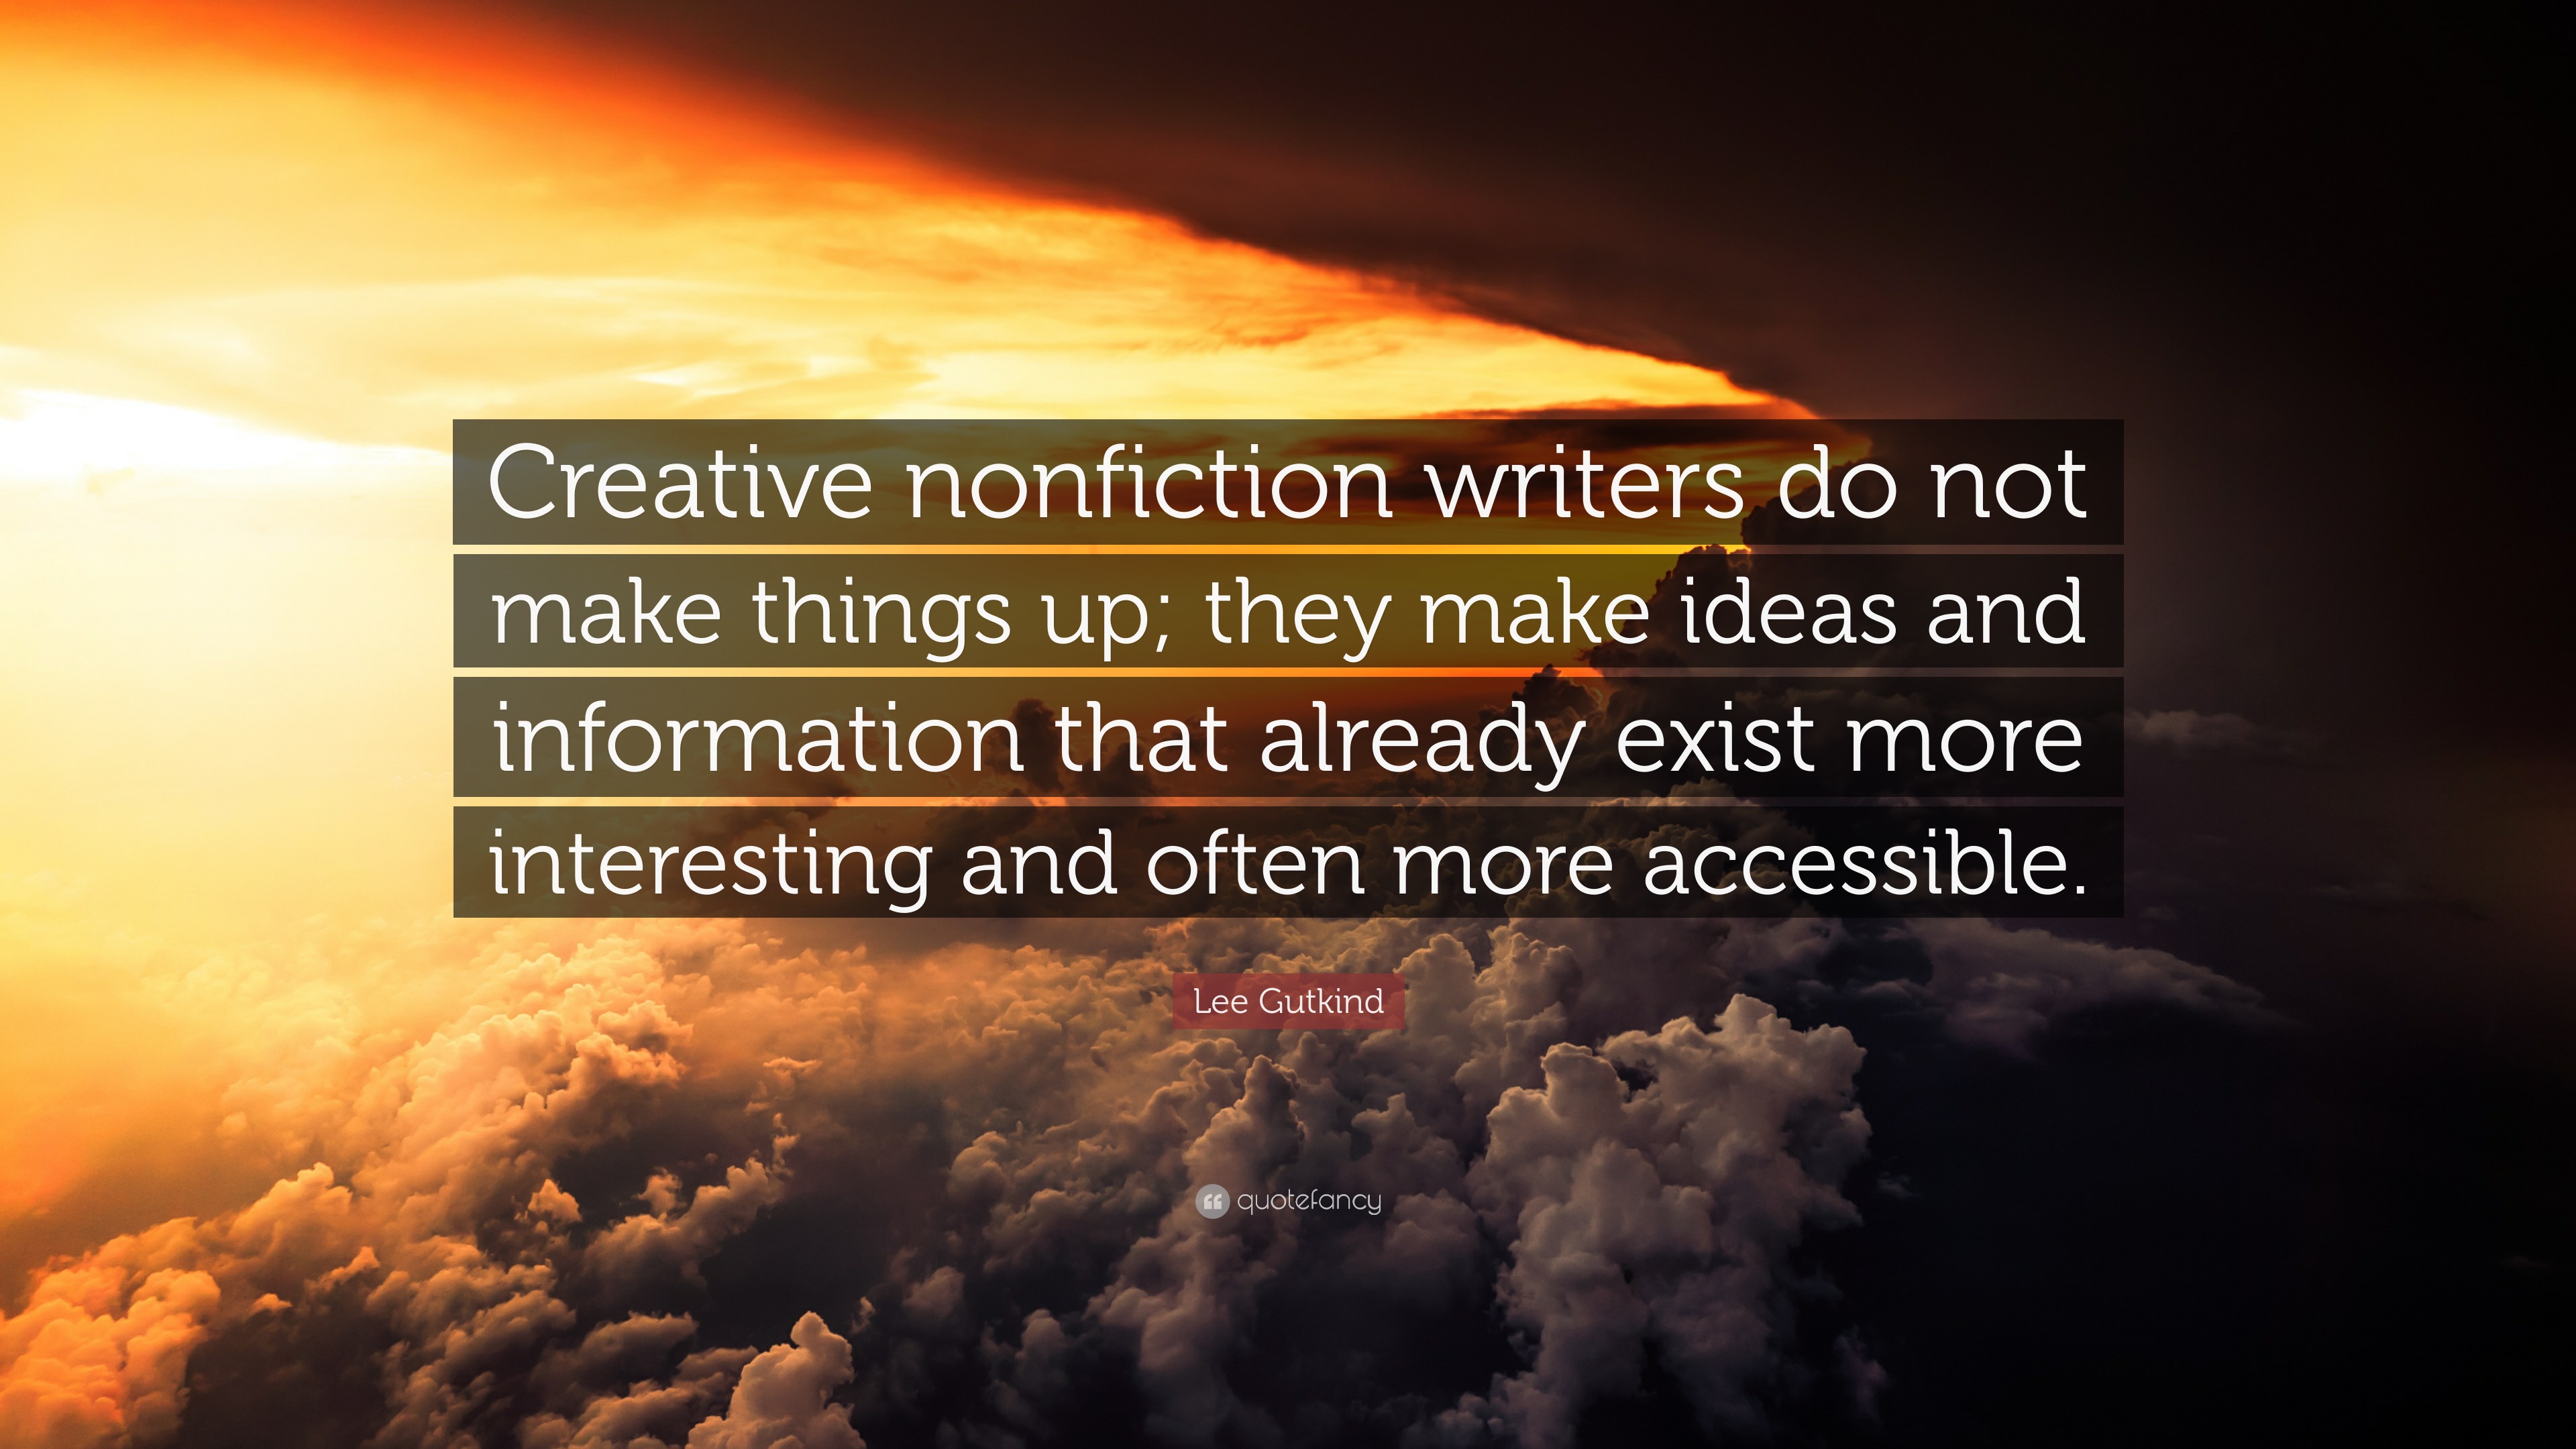 Lee Gutkind Quote: “Creative nonfiction writers do not make things up; they  make ideas and information that already exist more interesting a”